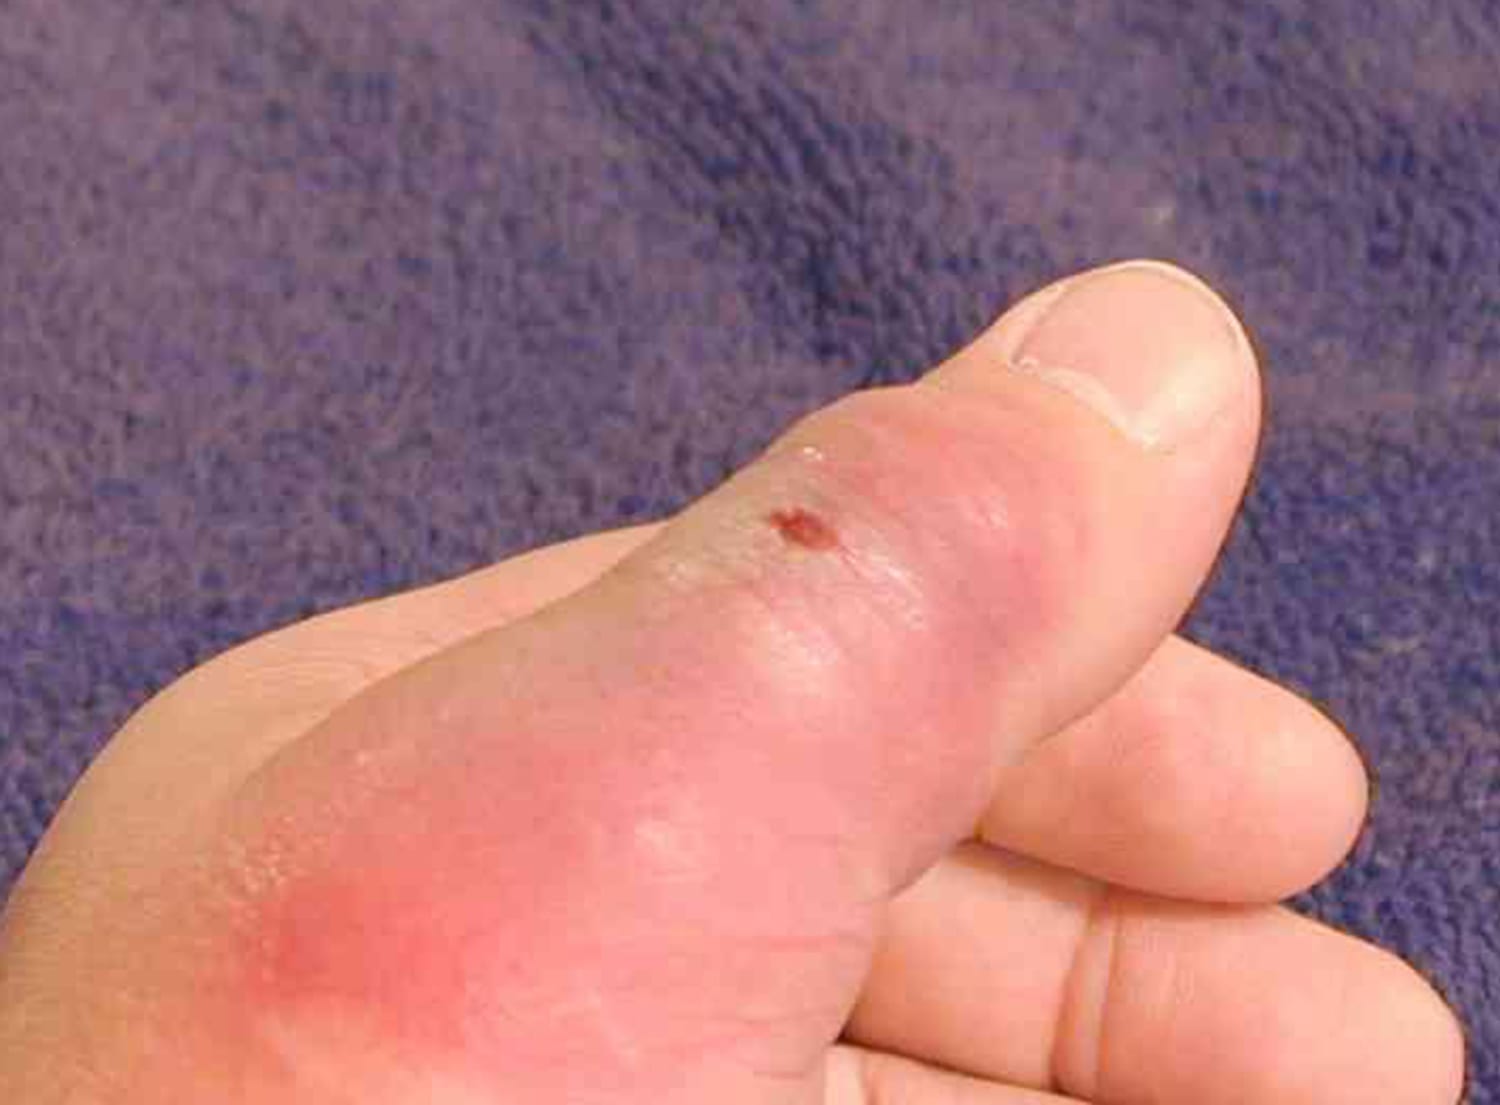 Spider Bite Pictures: What They Look Like and Tips to Identify